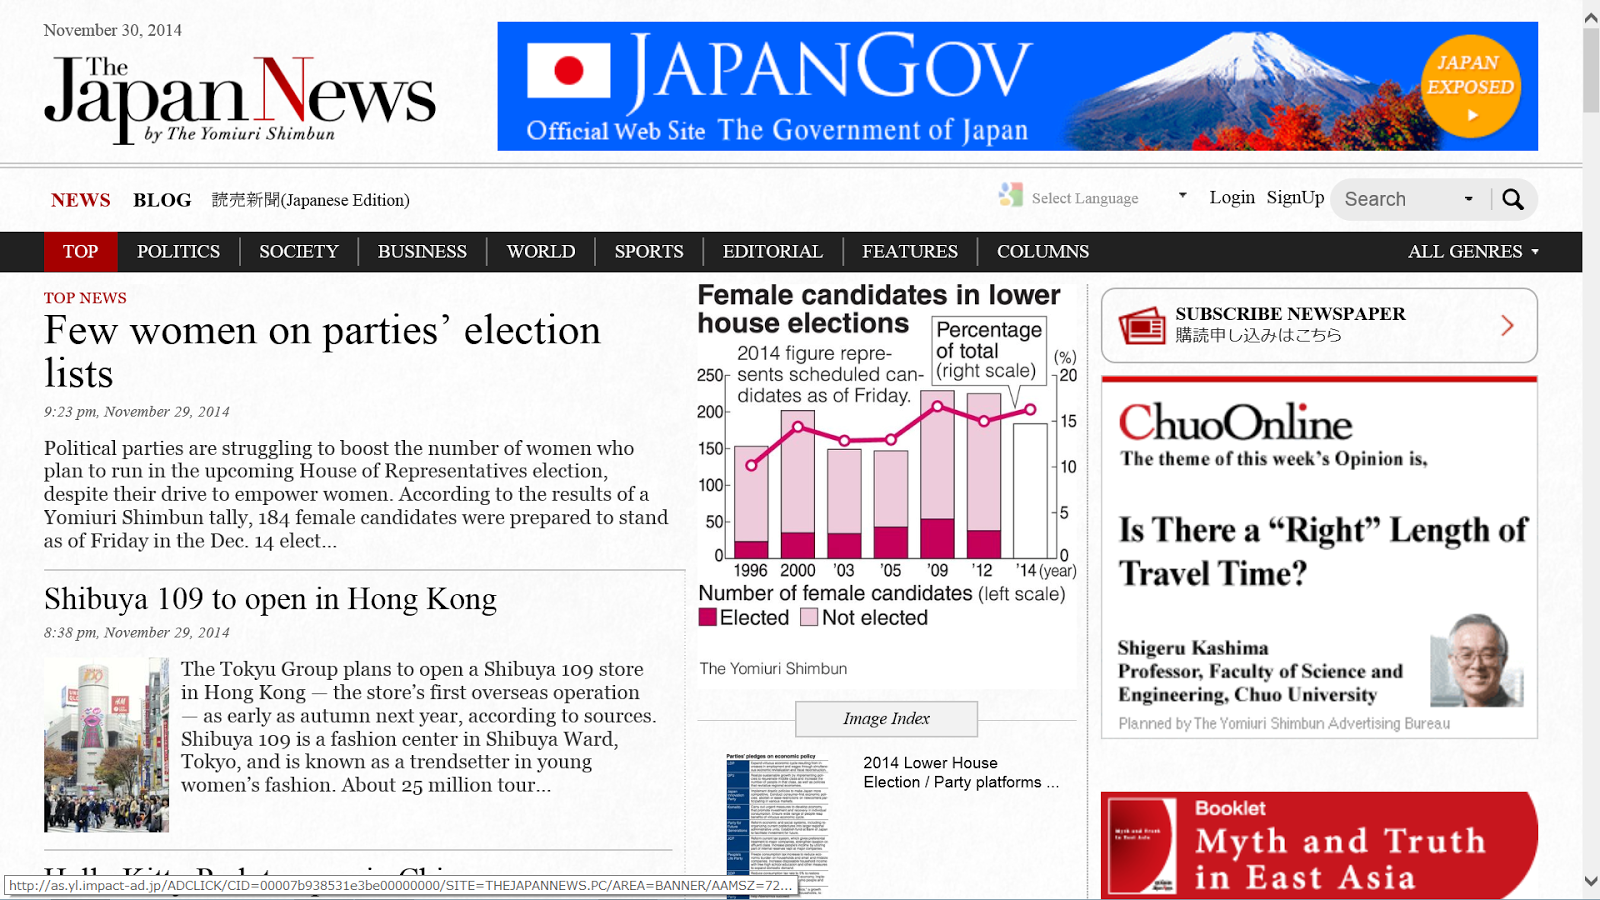 Peace Philosophy Centre 読売新聞の英語ページ冒頭に輝く 日本政府 の広告 Yomiuri Newspaper S English Page Has Big Banner Ad By The Government Of Japan